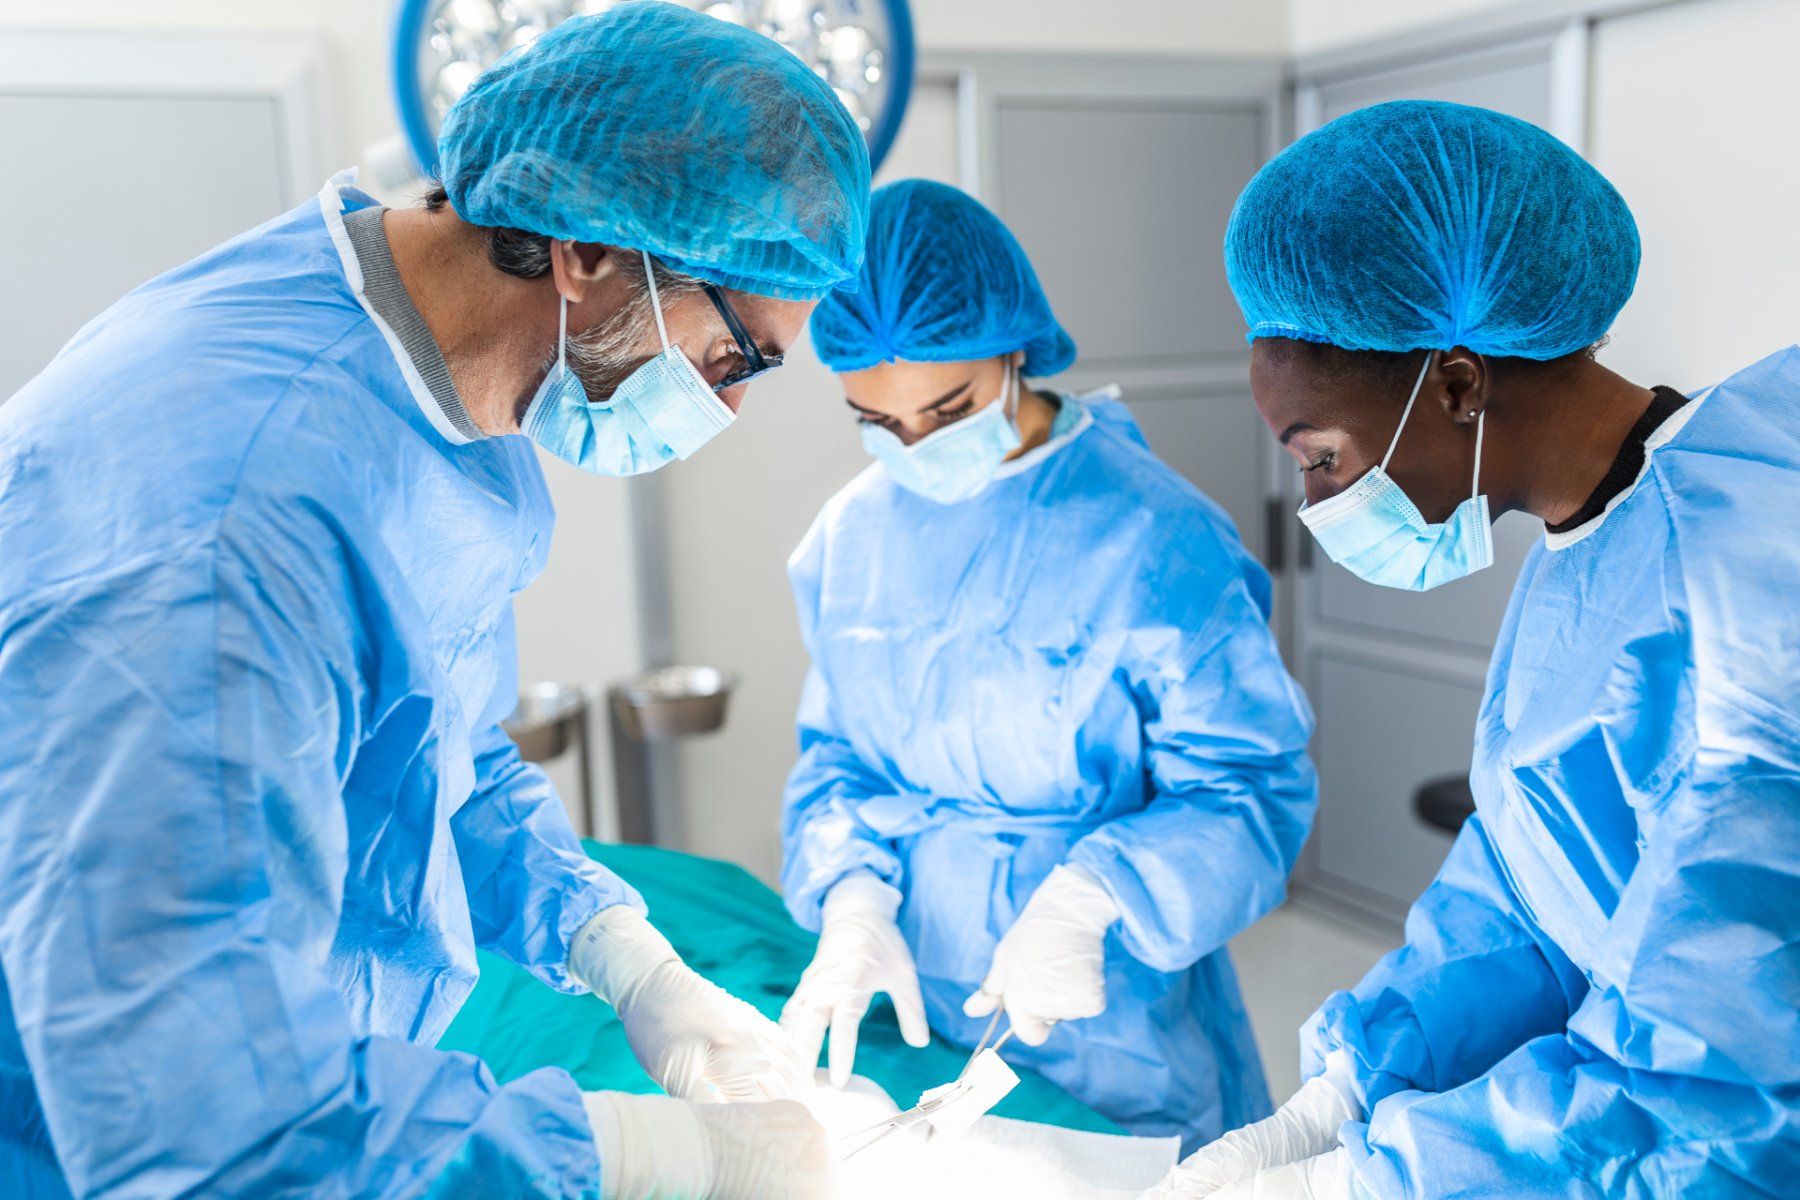 A surgical team in blue scrubs works on a patient - 3M Bair Hugger Class Action Lawsuit